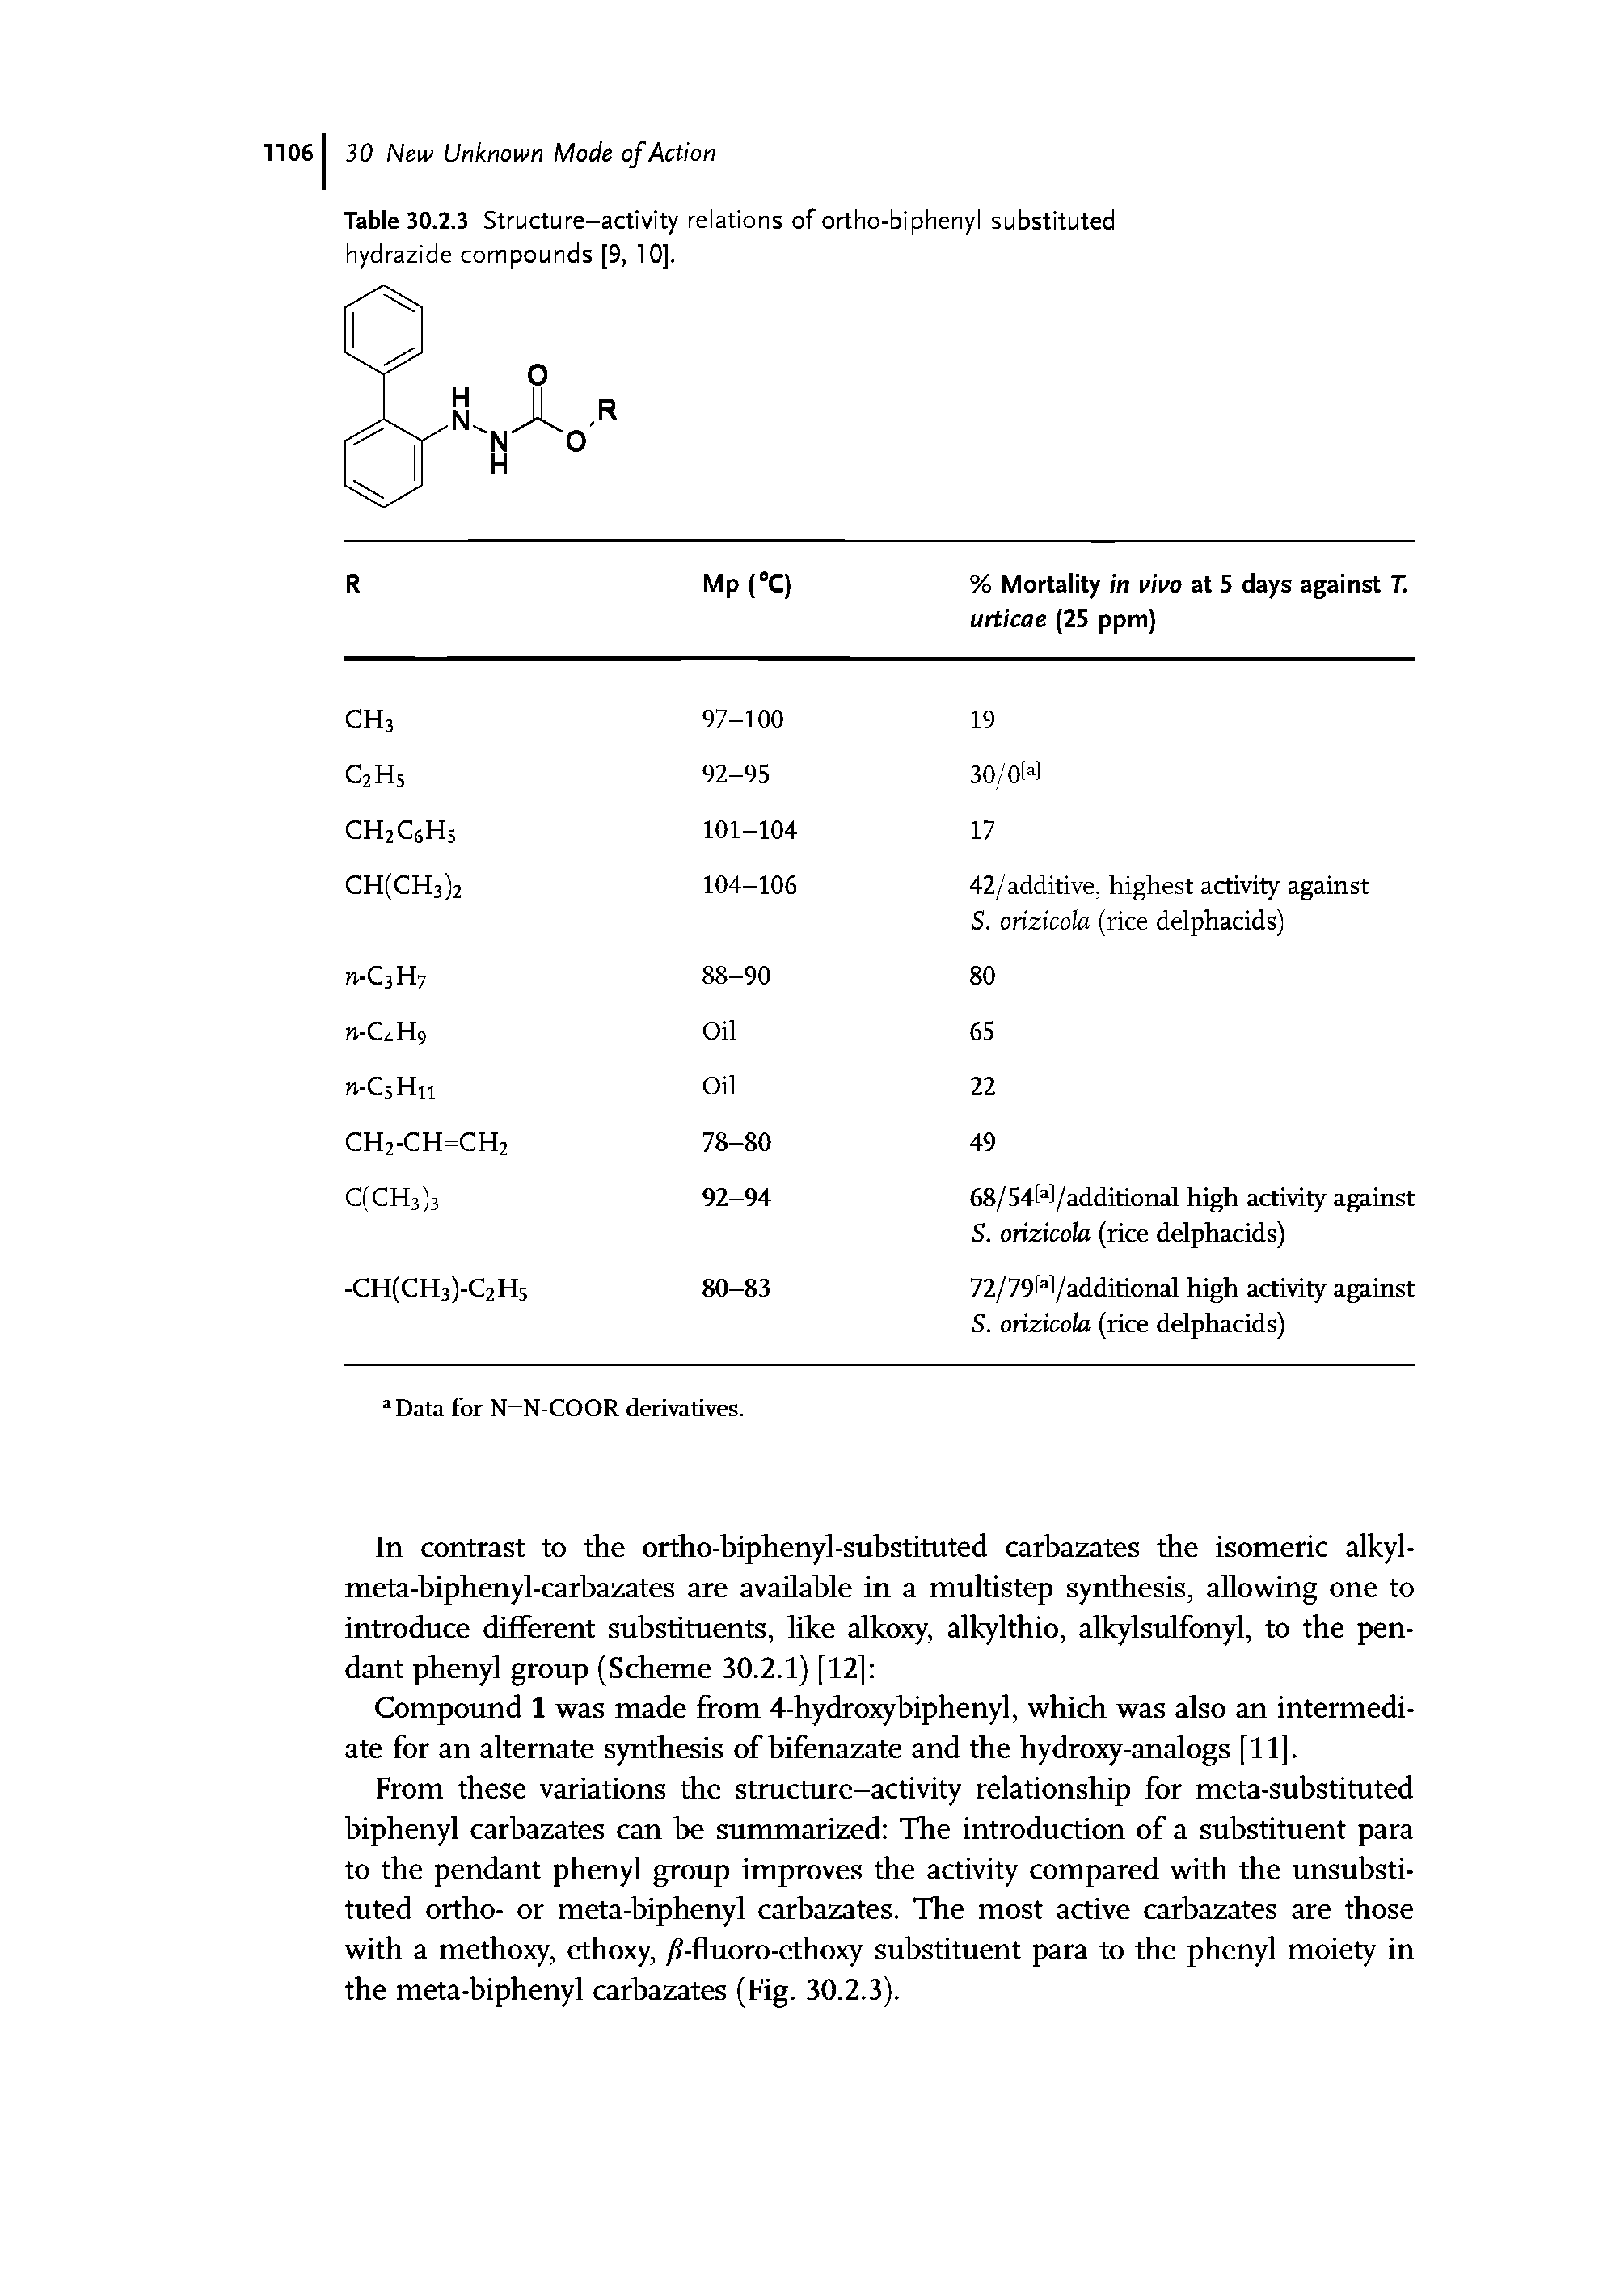 Table 30.2.3 Structure-activity relations of ortho-biphenyl substituted hydrazide compounds [9, 10].